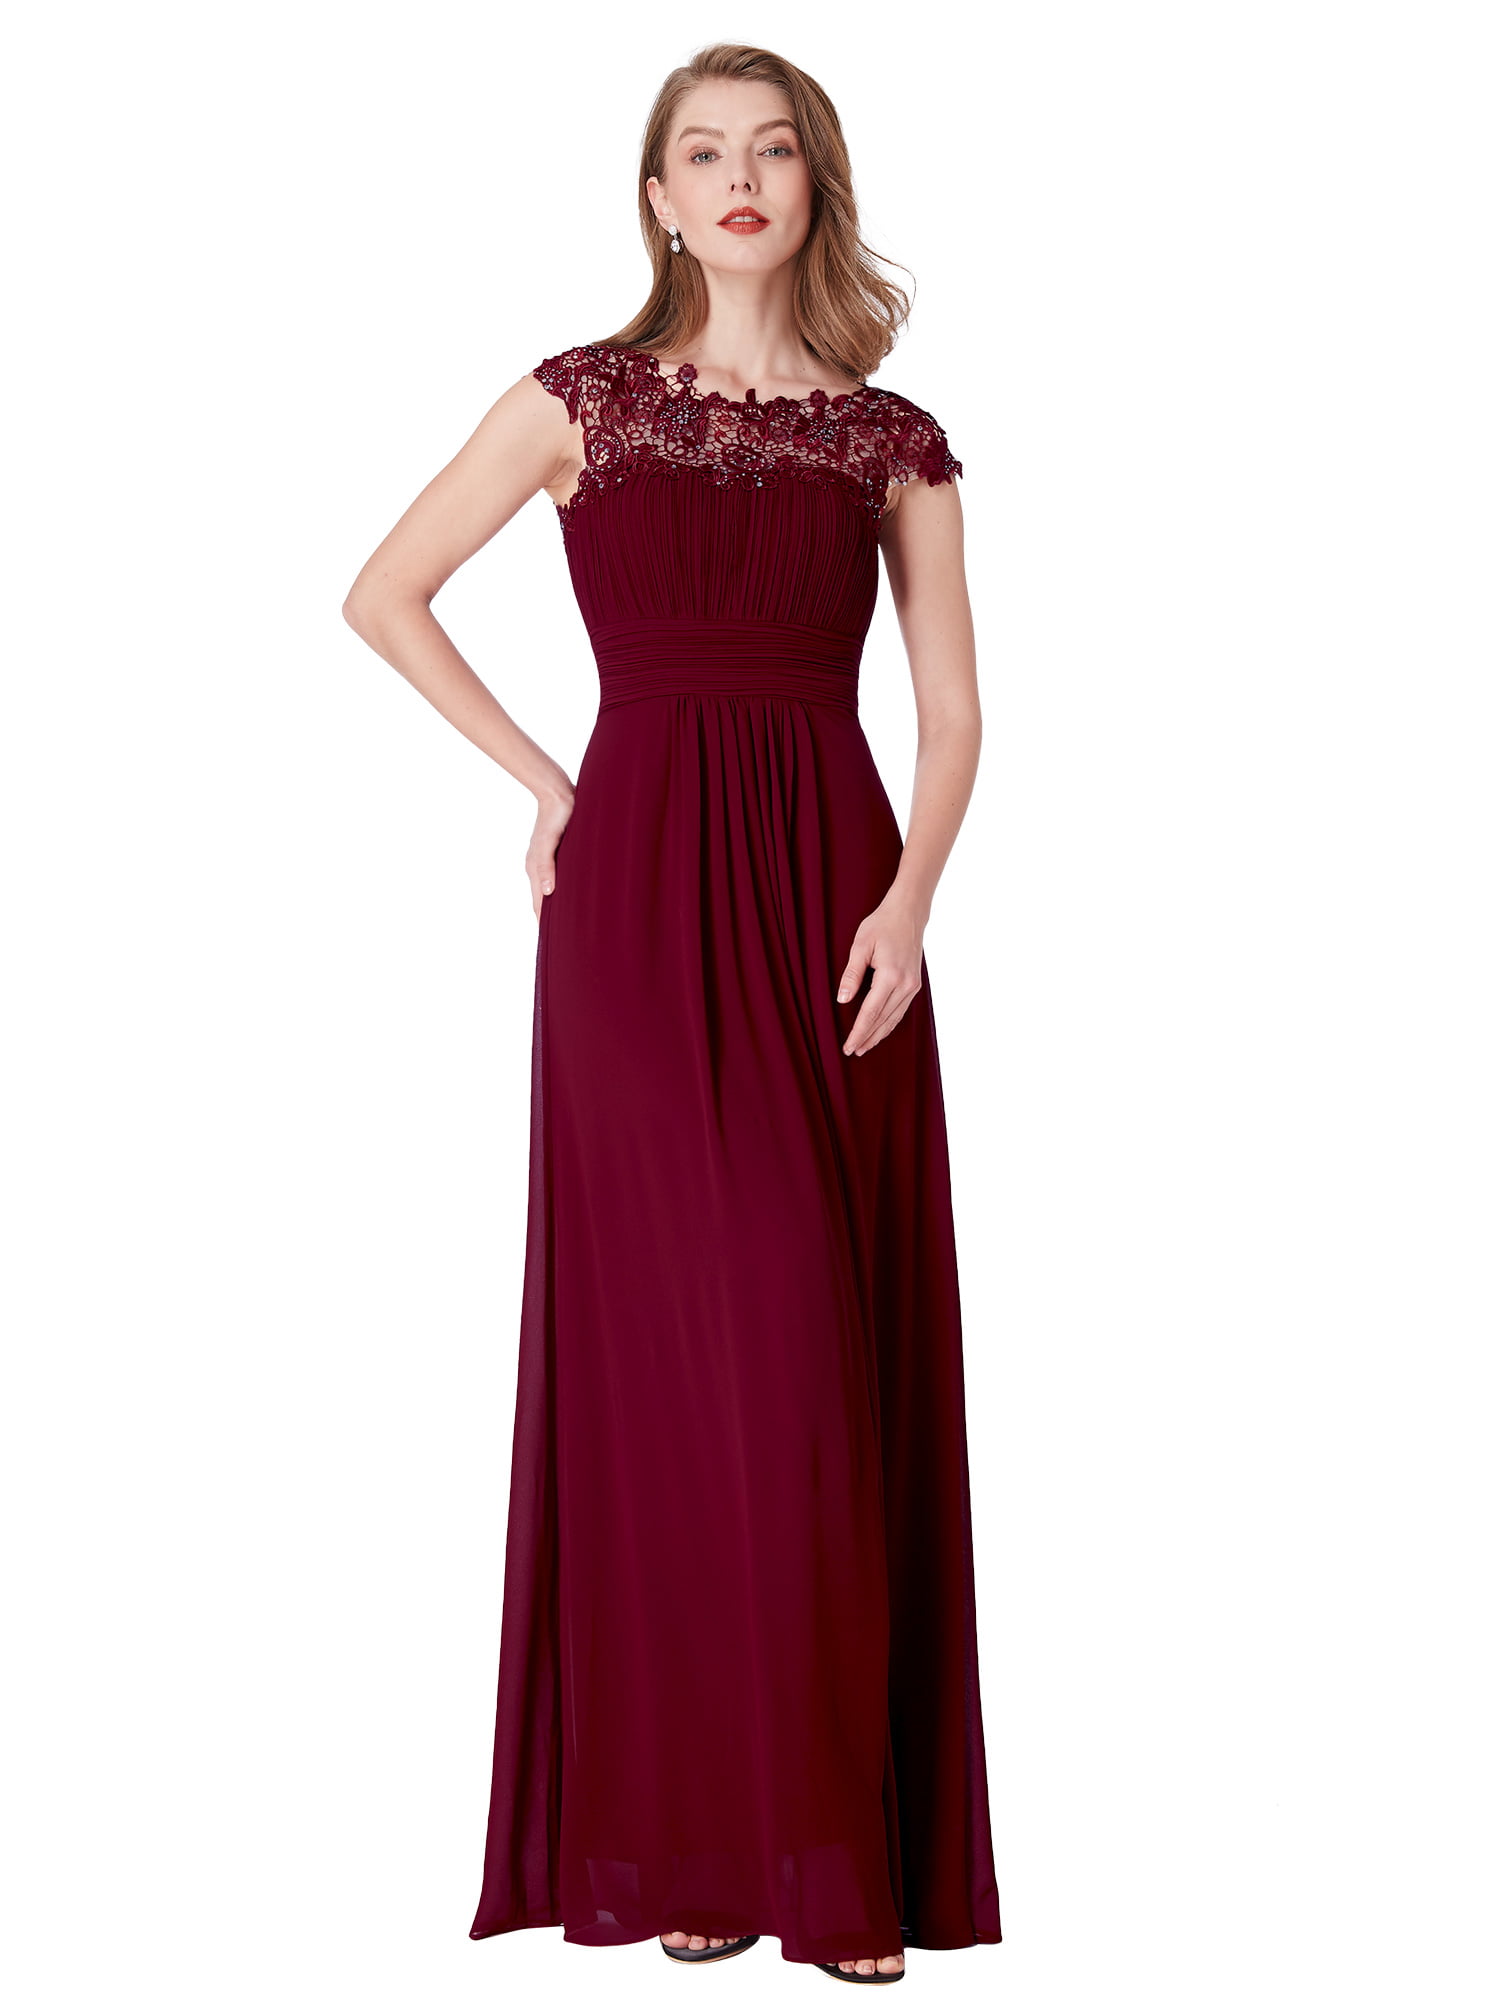 Women Short Maxi Lace Evening Formal Party Cocktail Dress Bridesmaid Prom Gown